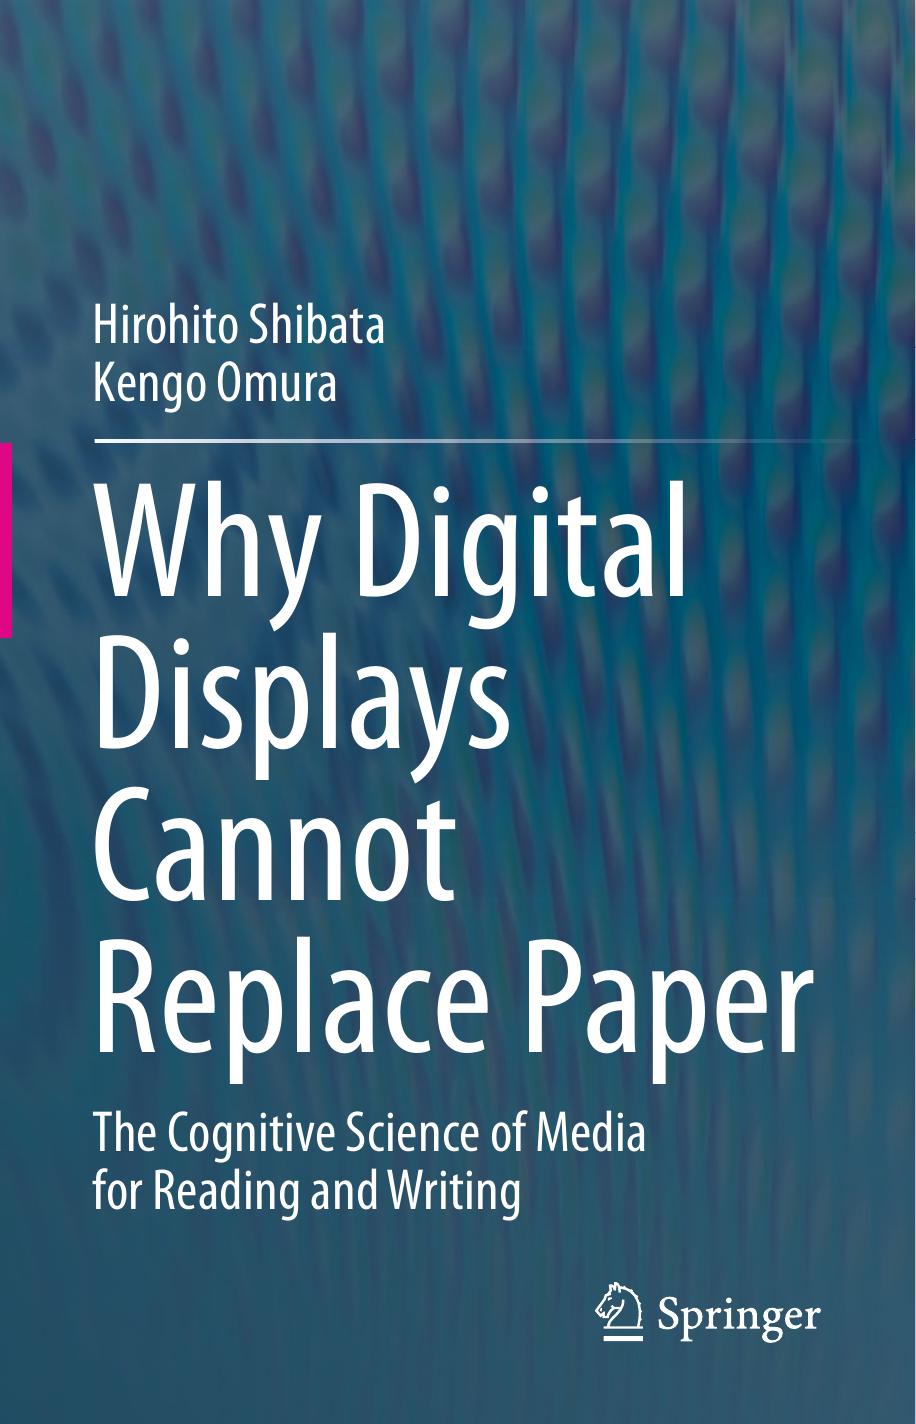 Why Digital Displays Cannot Replace Paper: The Cognitive Science of Media for Reading and Writing